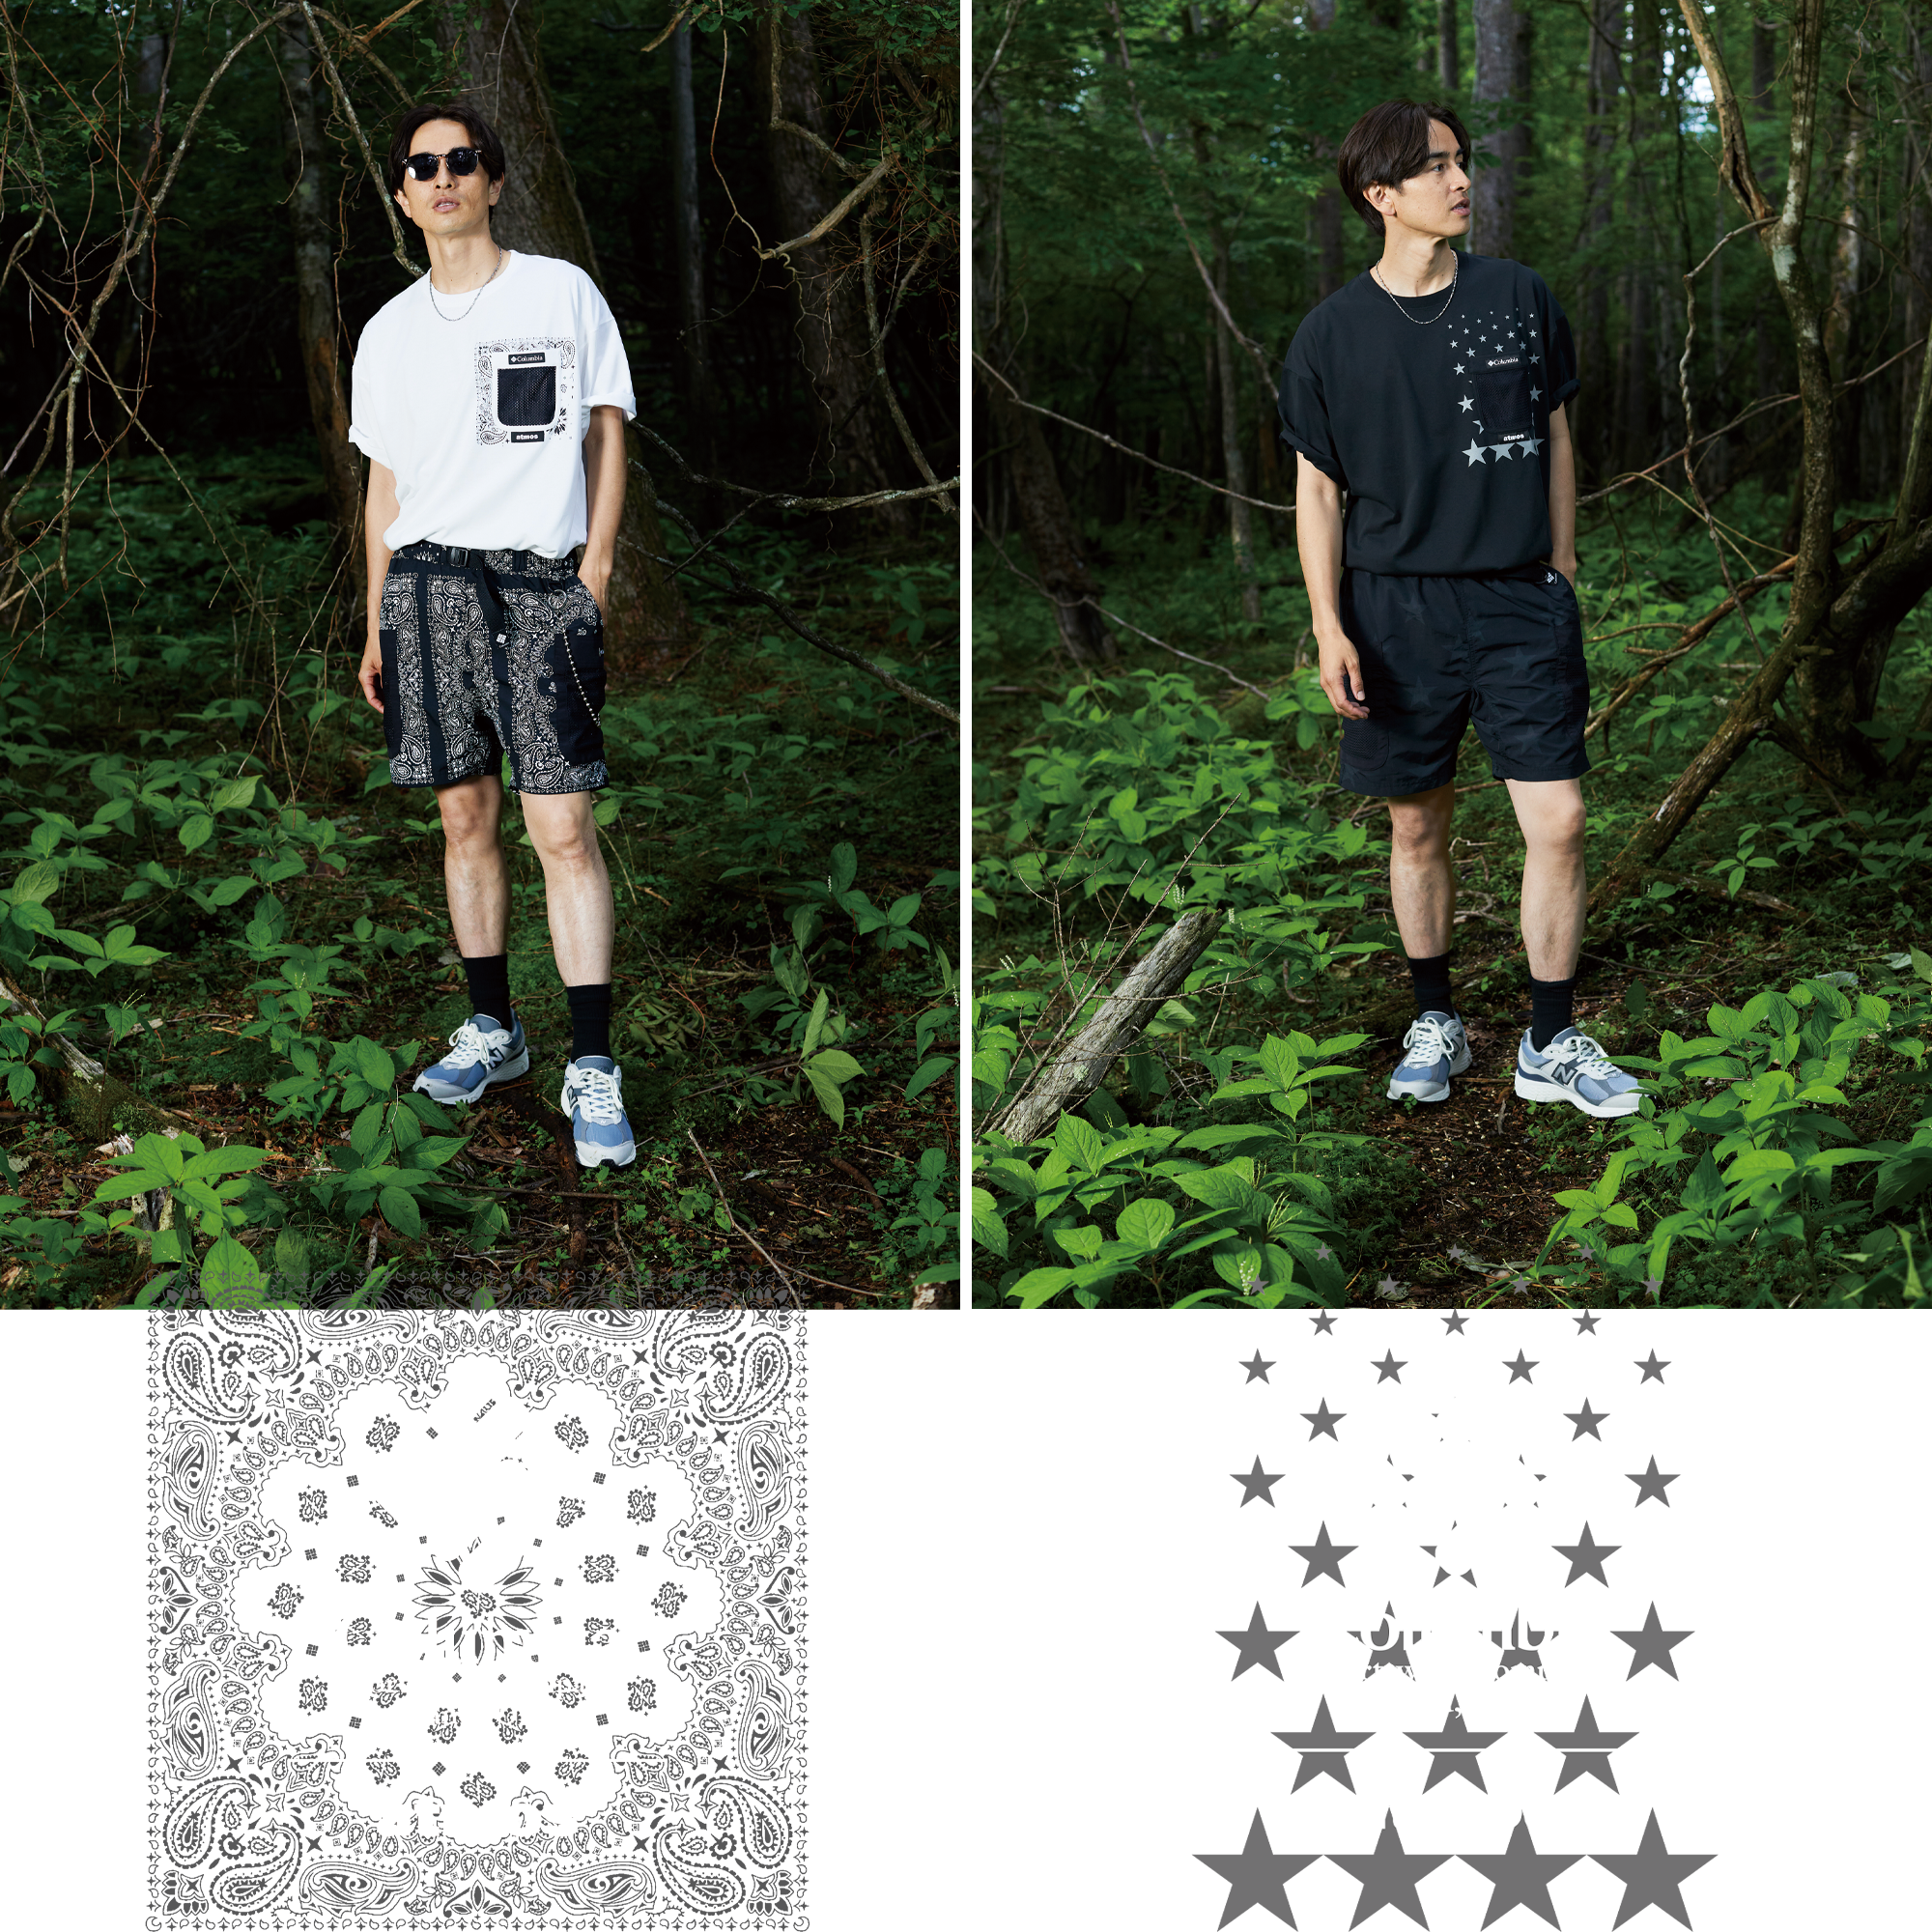 Columbia × atmos 23 SUMMER CAPSULE COLLECTION